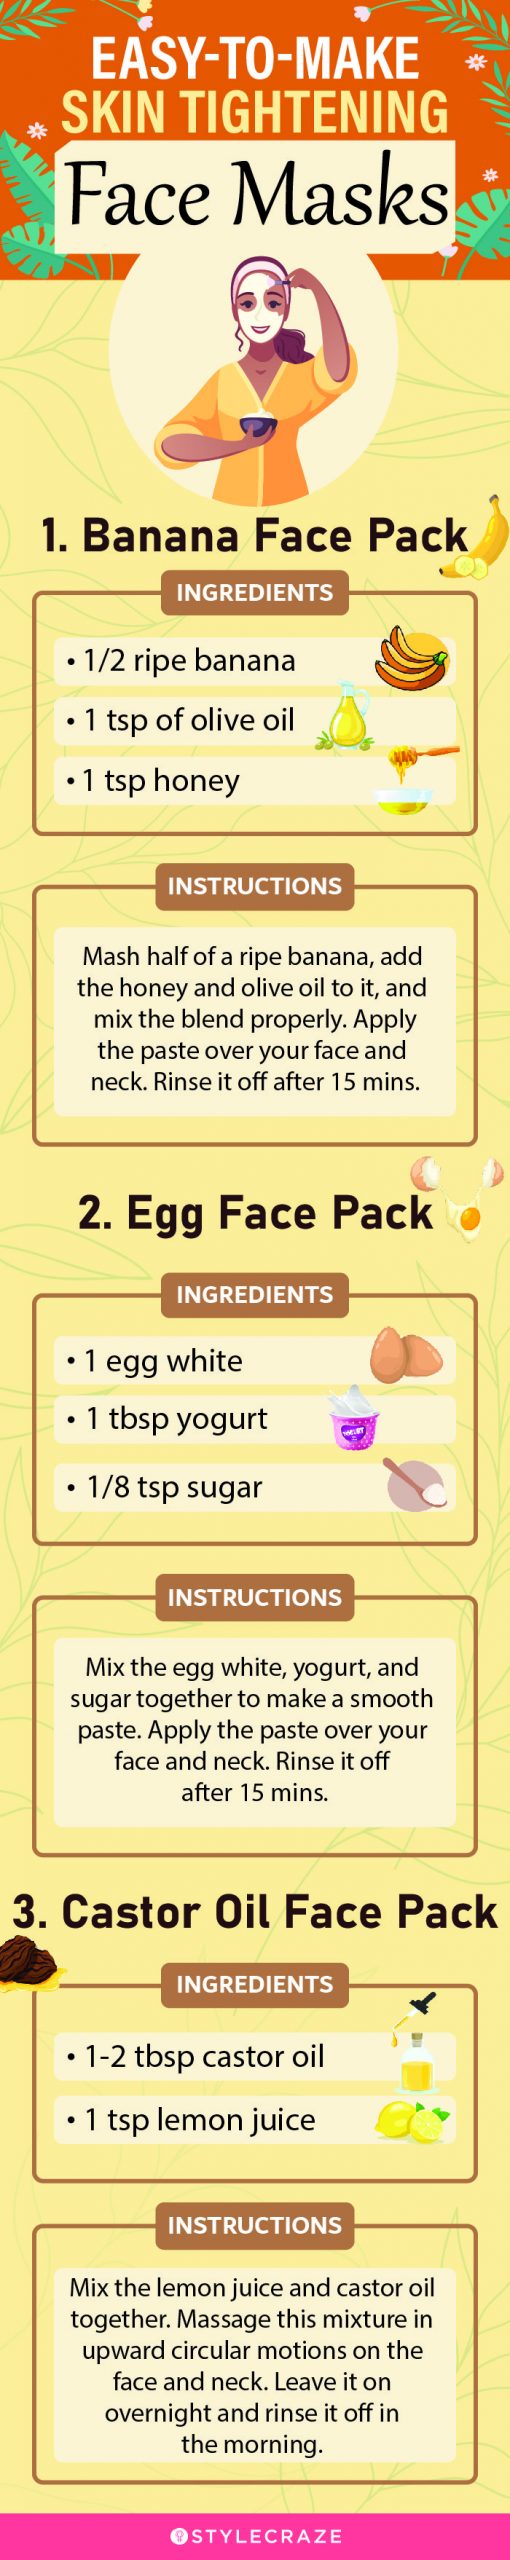 easy to make skin tightening face masks (infographic)